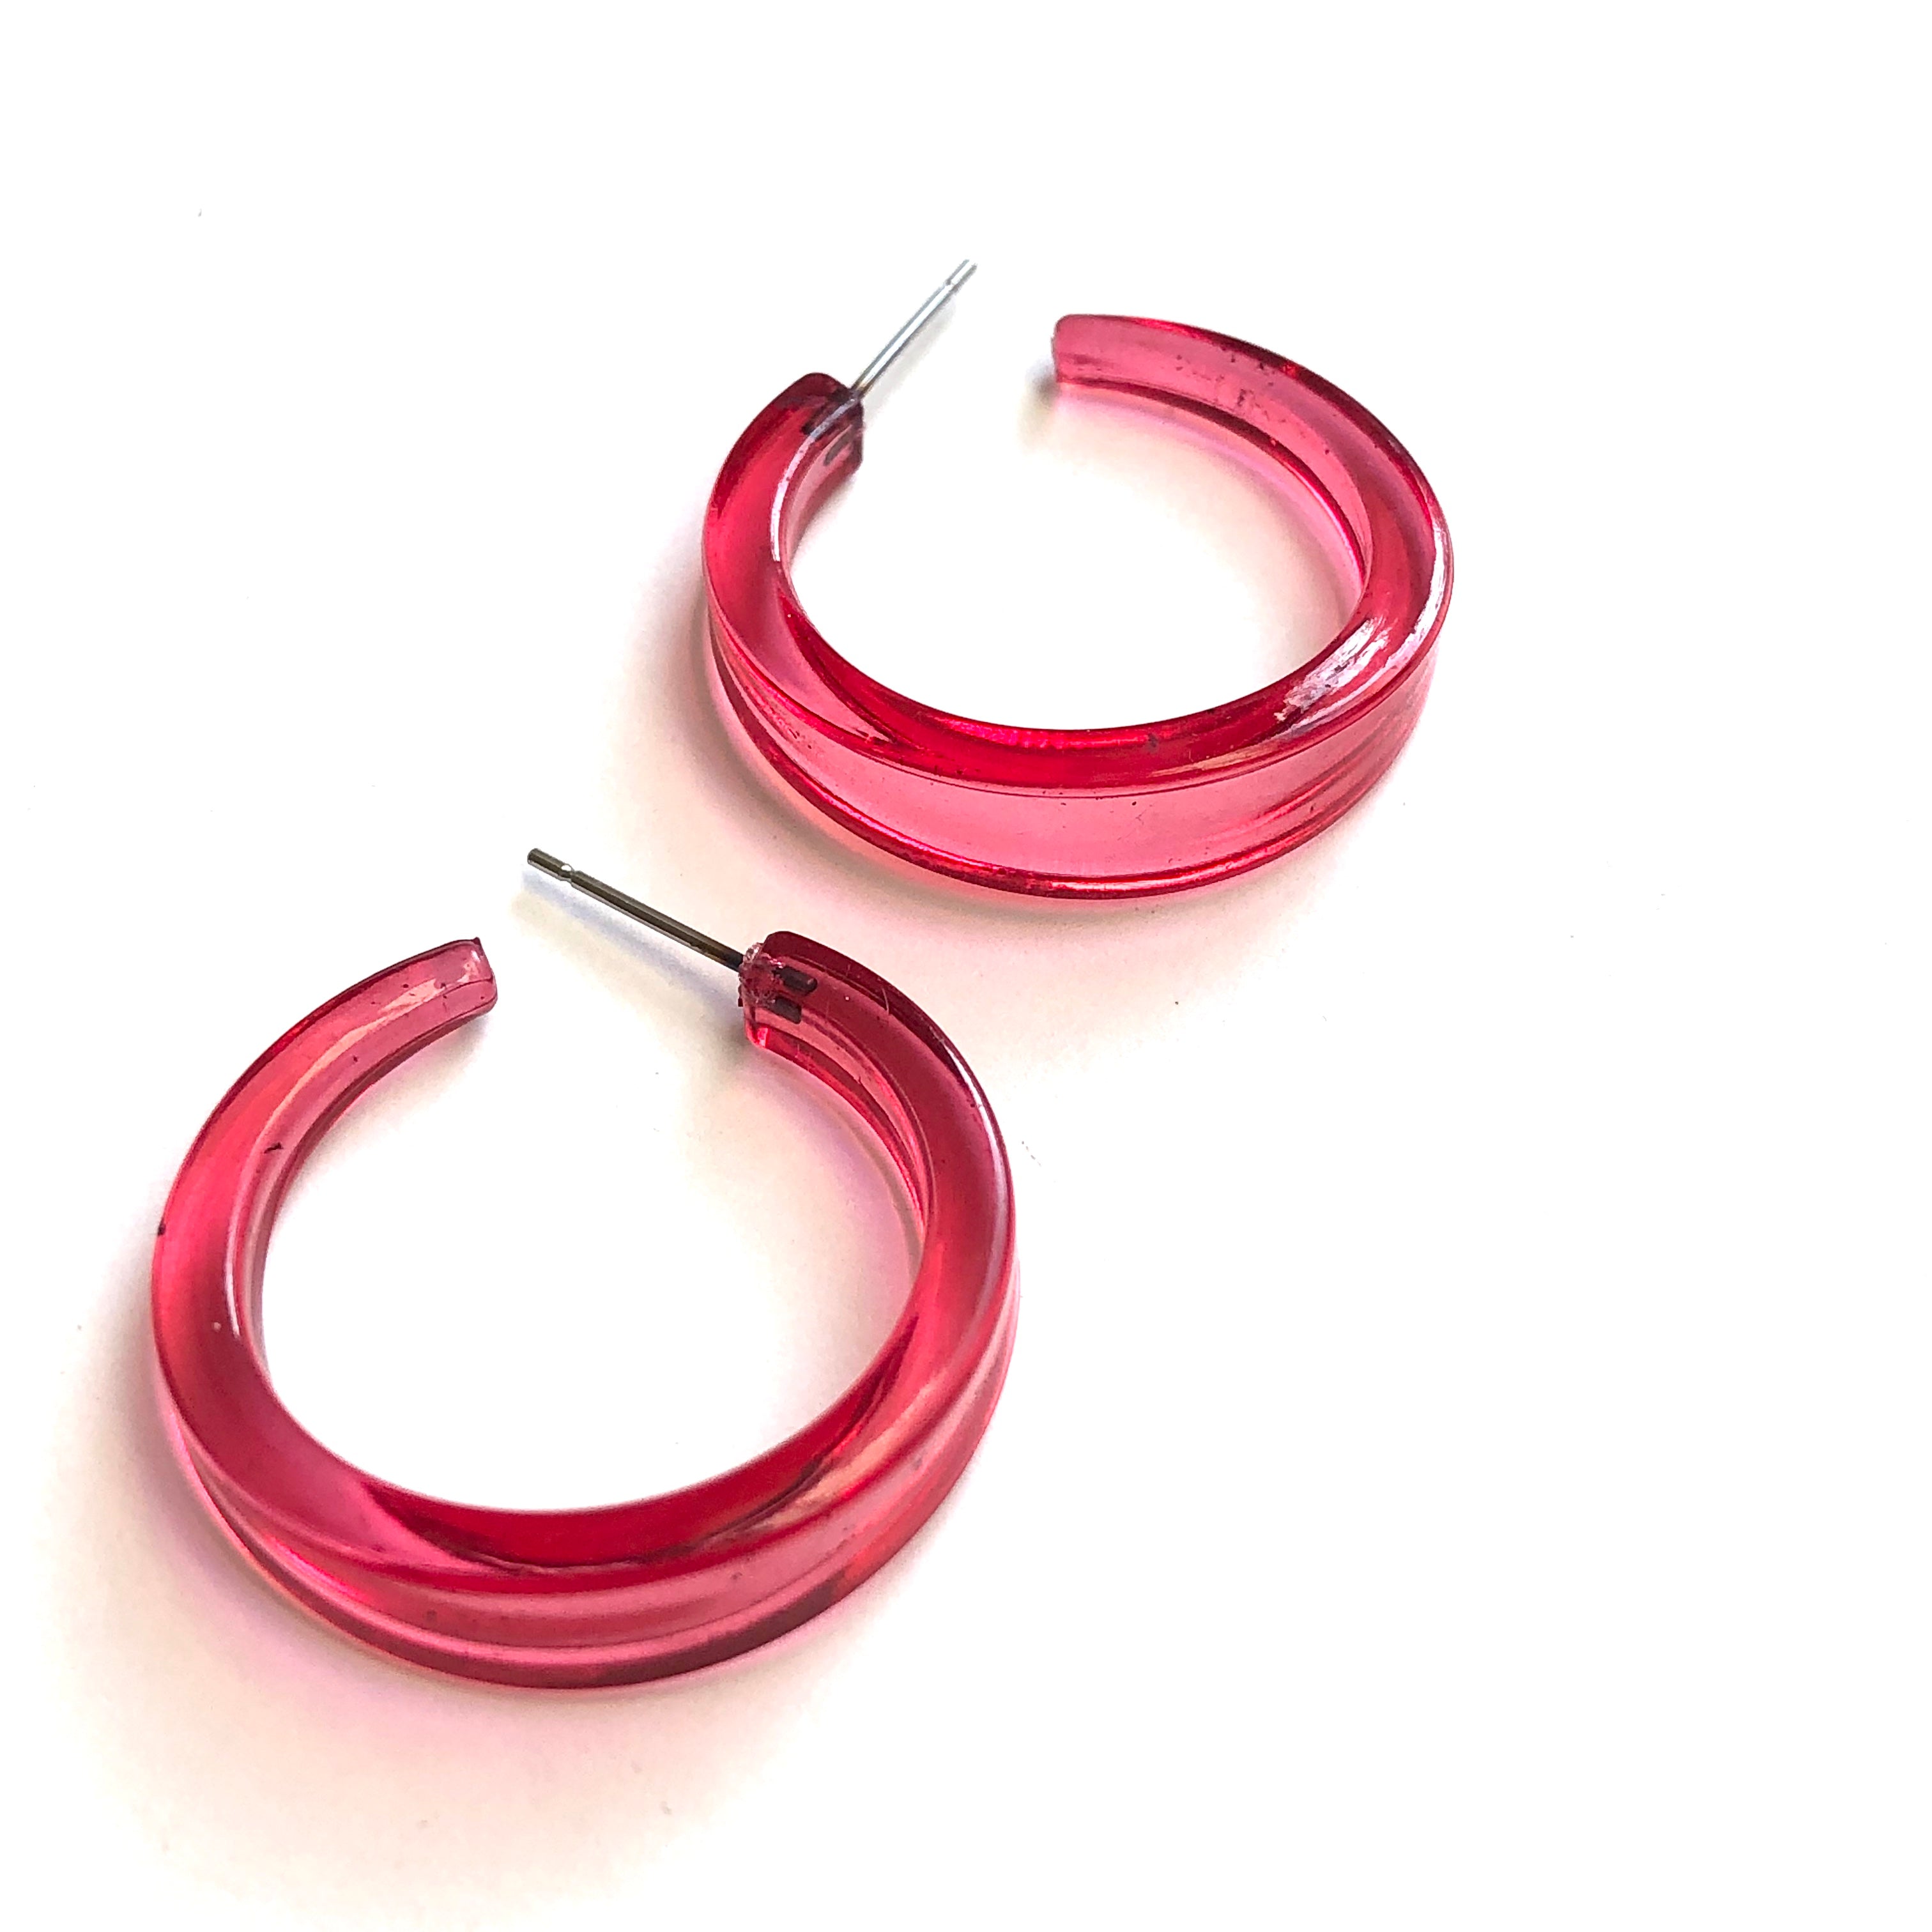 cranberry glass hoops